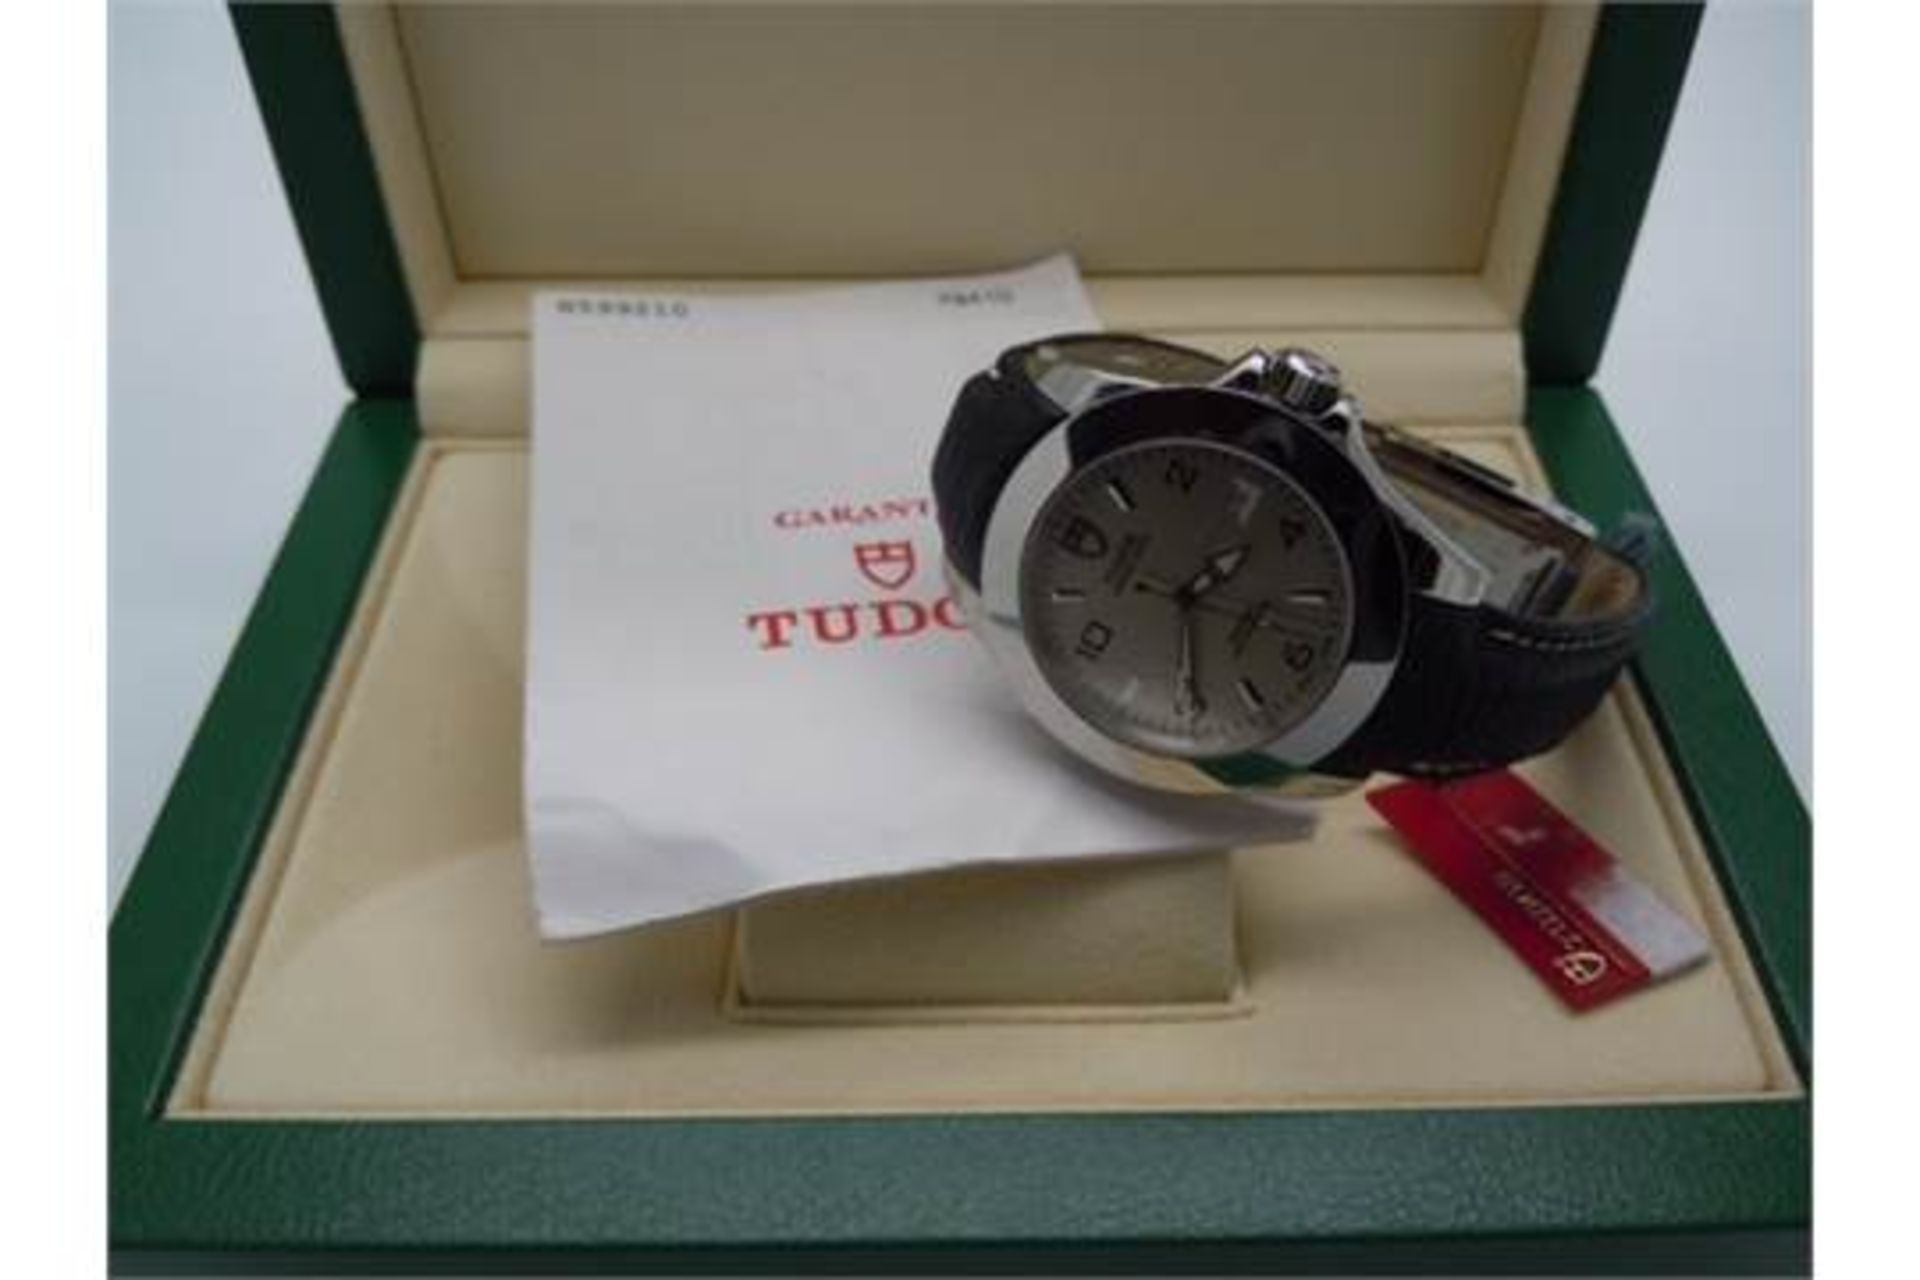 BRAND NEW OLD STOCK TUDOR PRINCE DATE ROTOR SELF WINDING WATCH STILL WITH STICKERS BOXED - Image 6 of 6